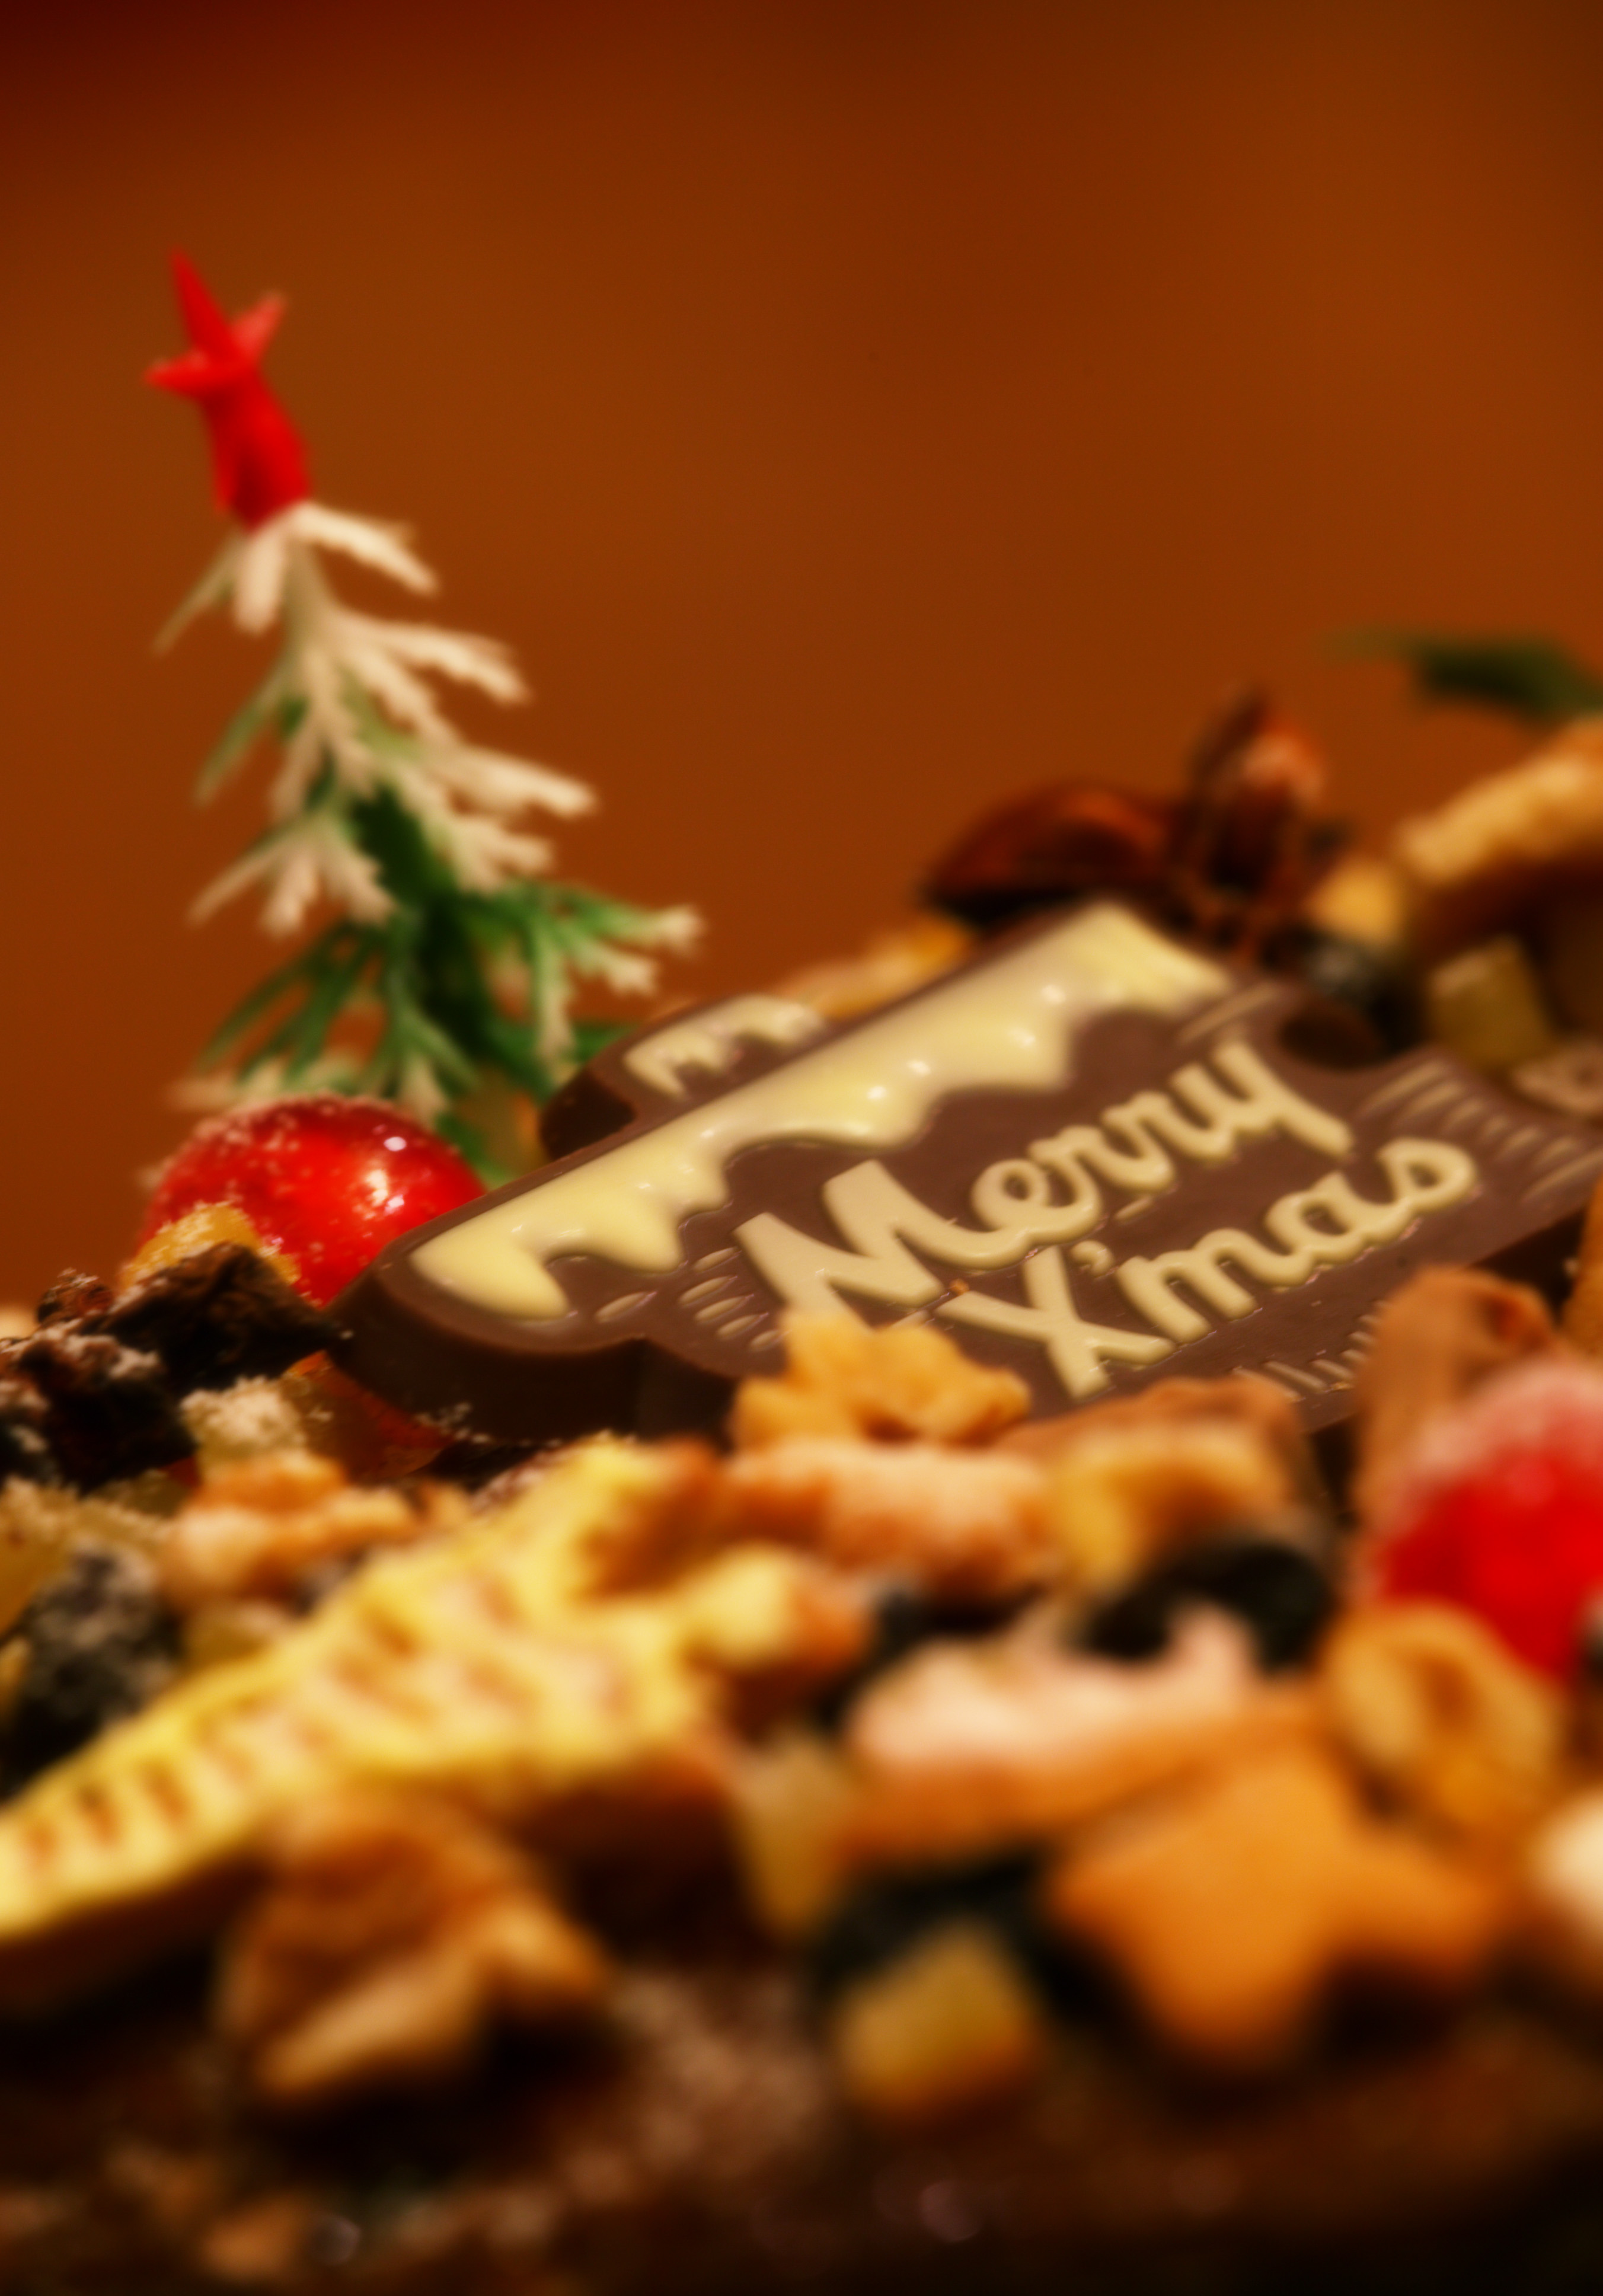 photo,material,free,landscape,picture,stock photo,Creative Commons,Christmas cake, Sugar, Christmas tree, Chocolate, cake